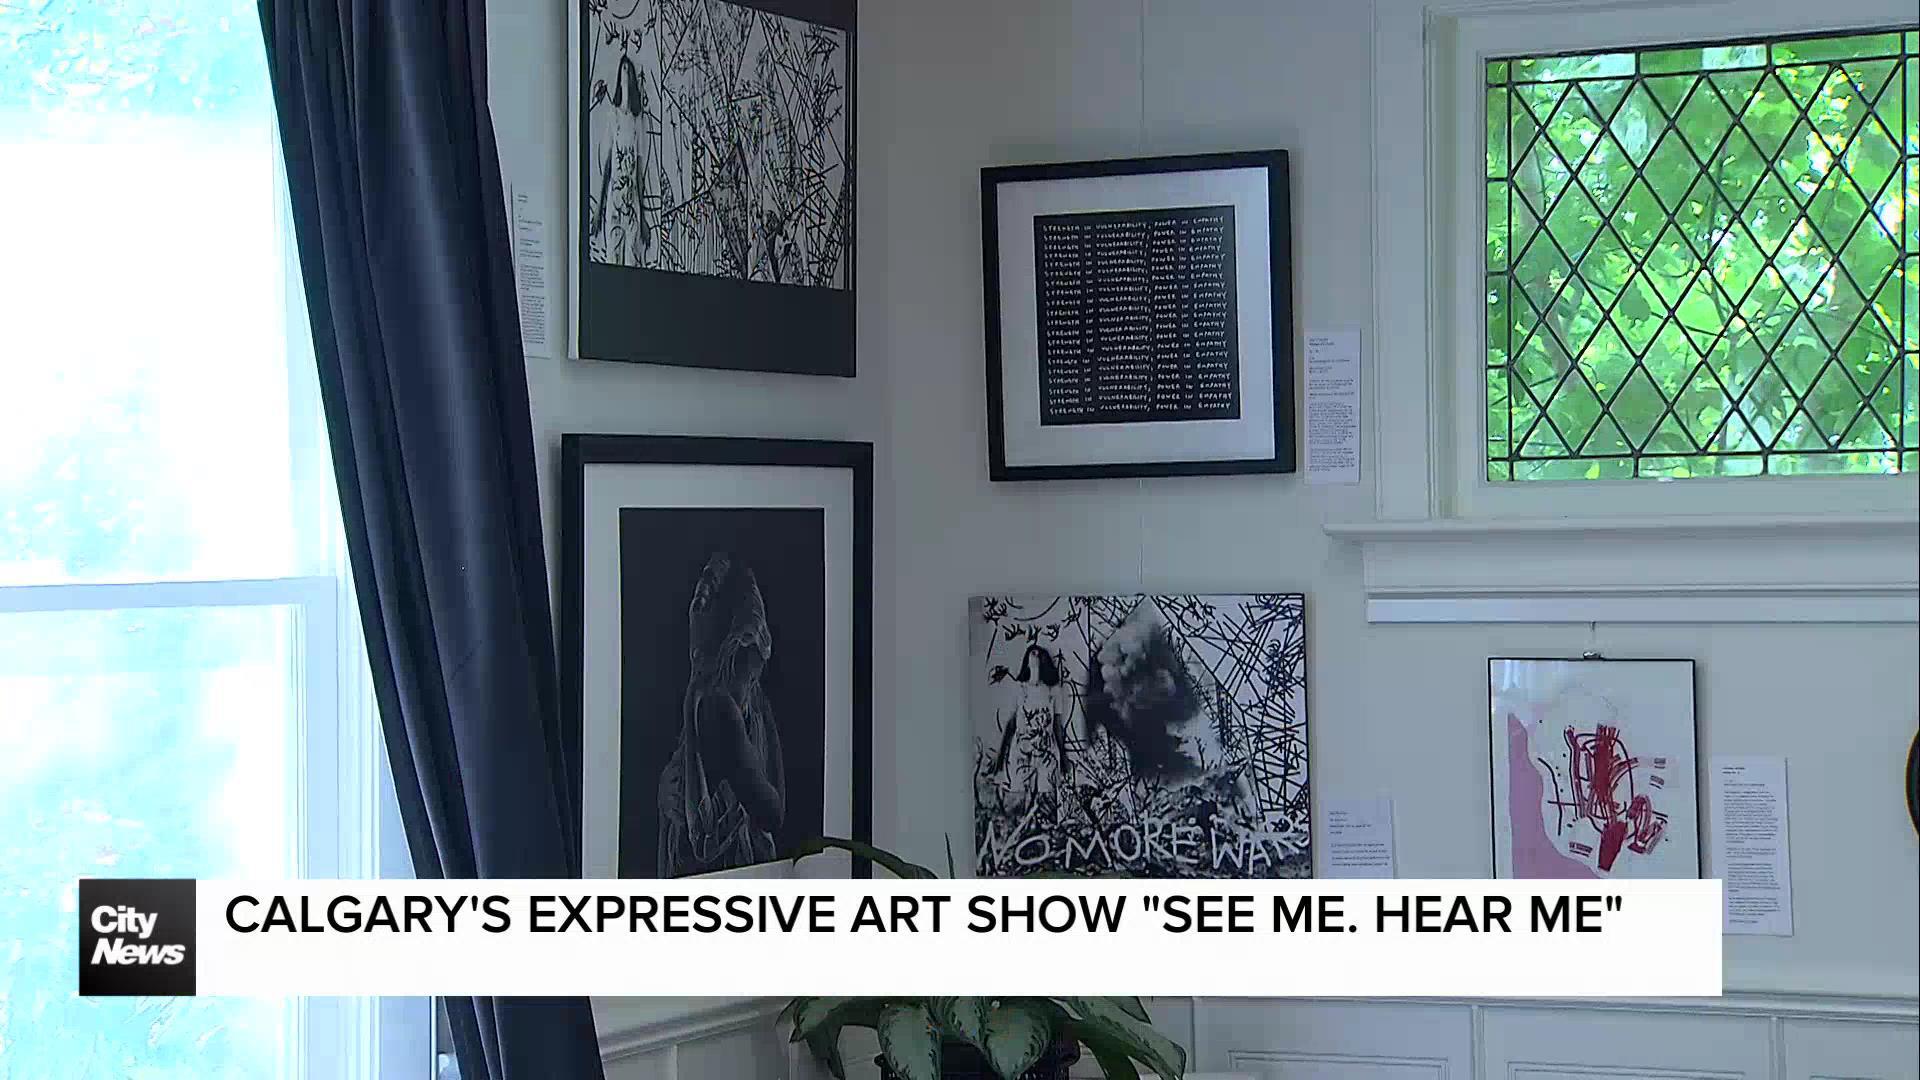 Canopy Studios hosted their third annual see me hear me expressive art show Saturday